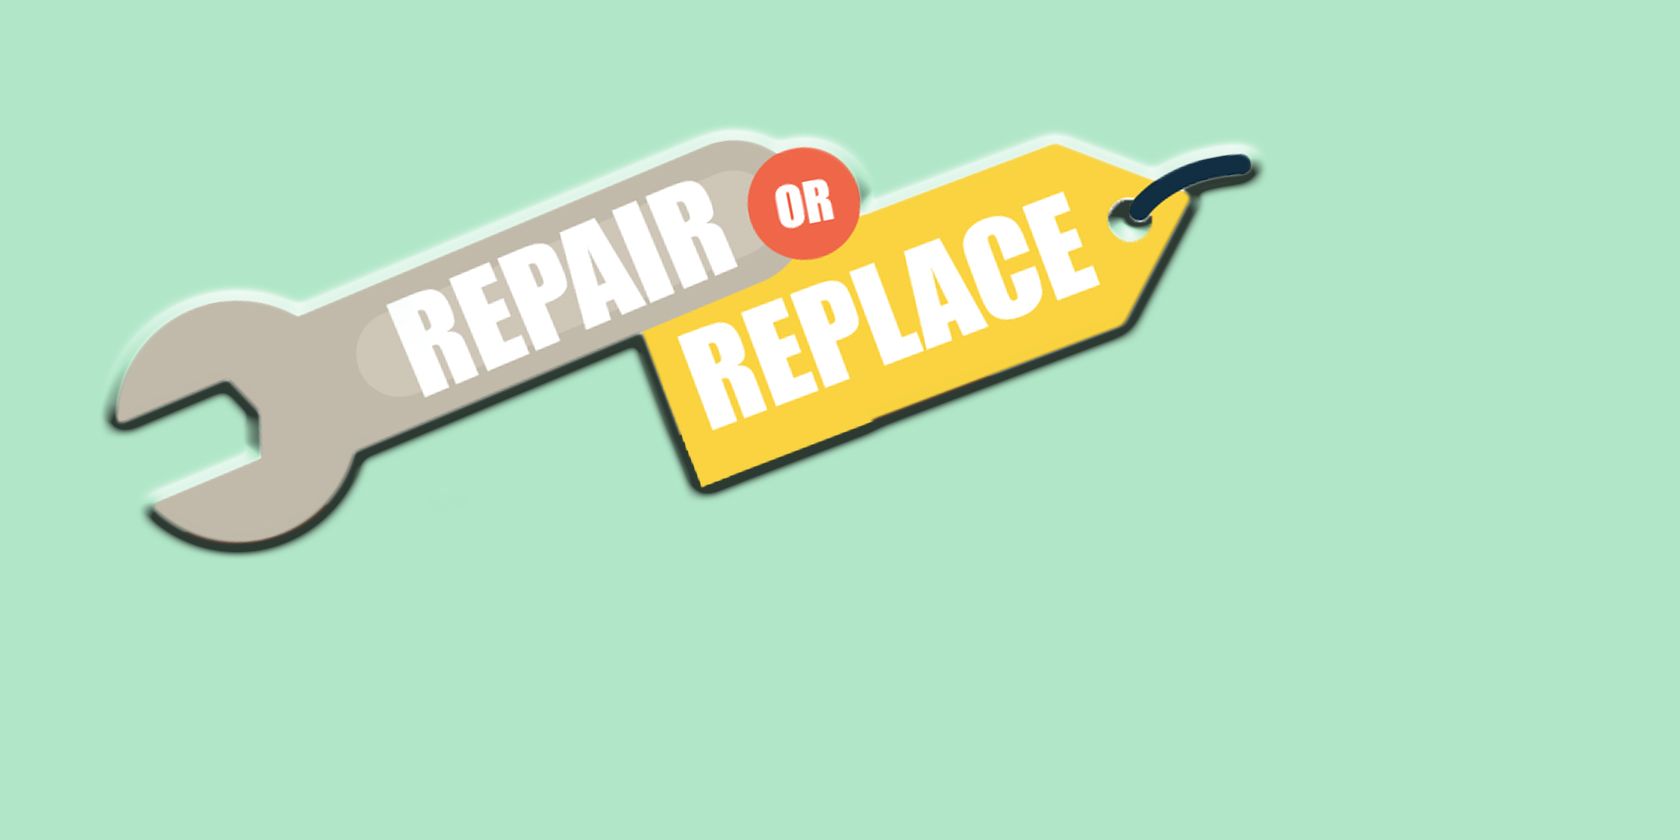 To Repair or Replace - That is the Question